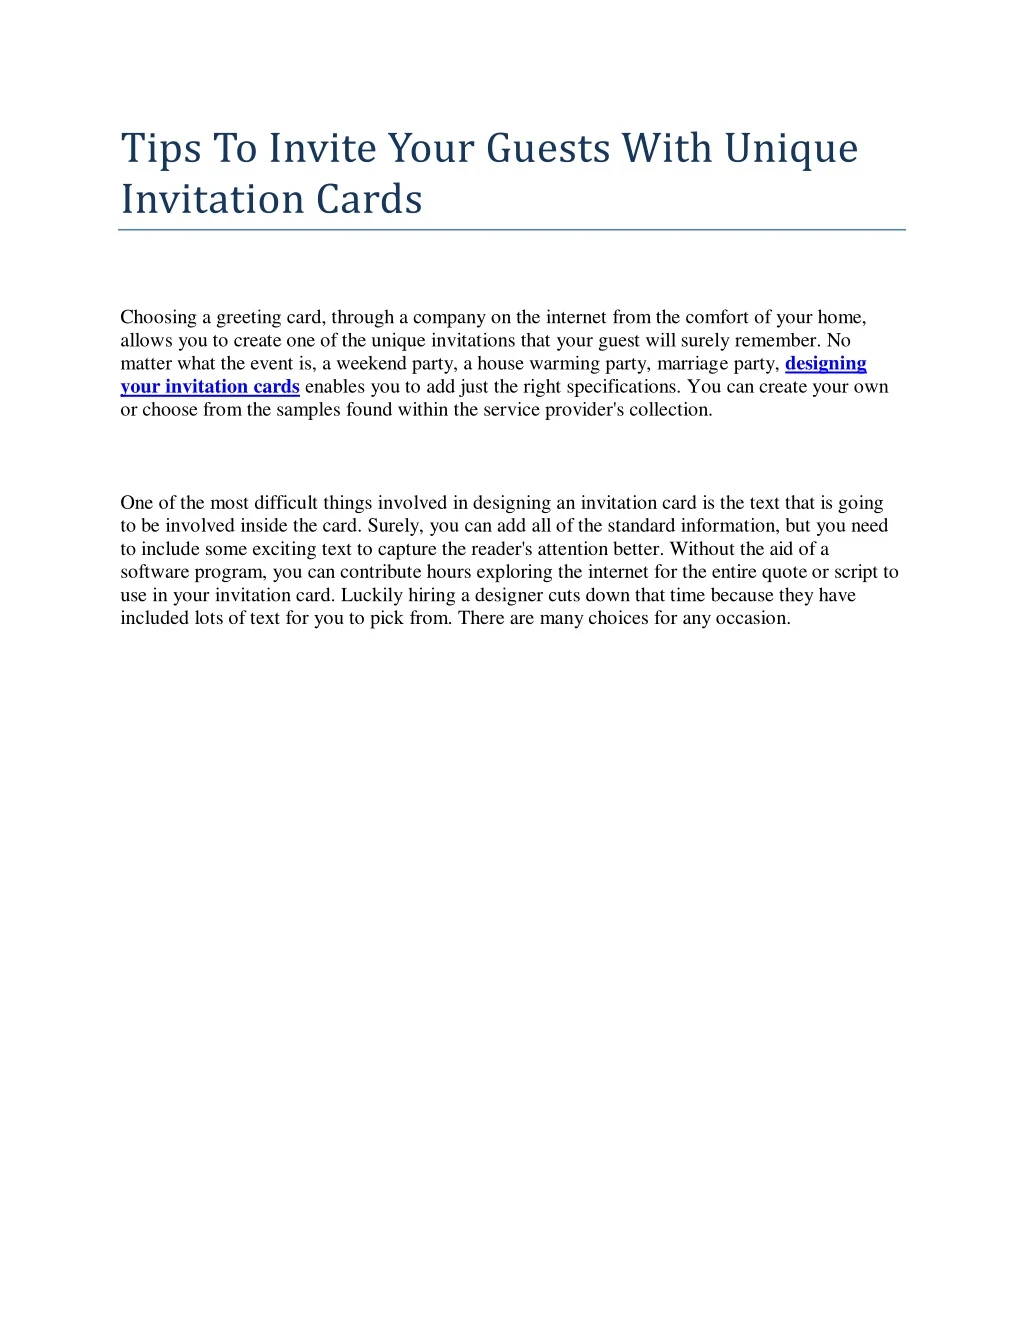 tips to invite your guests with unique invitation